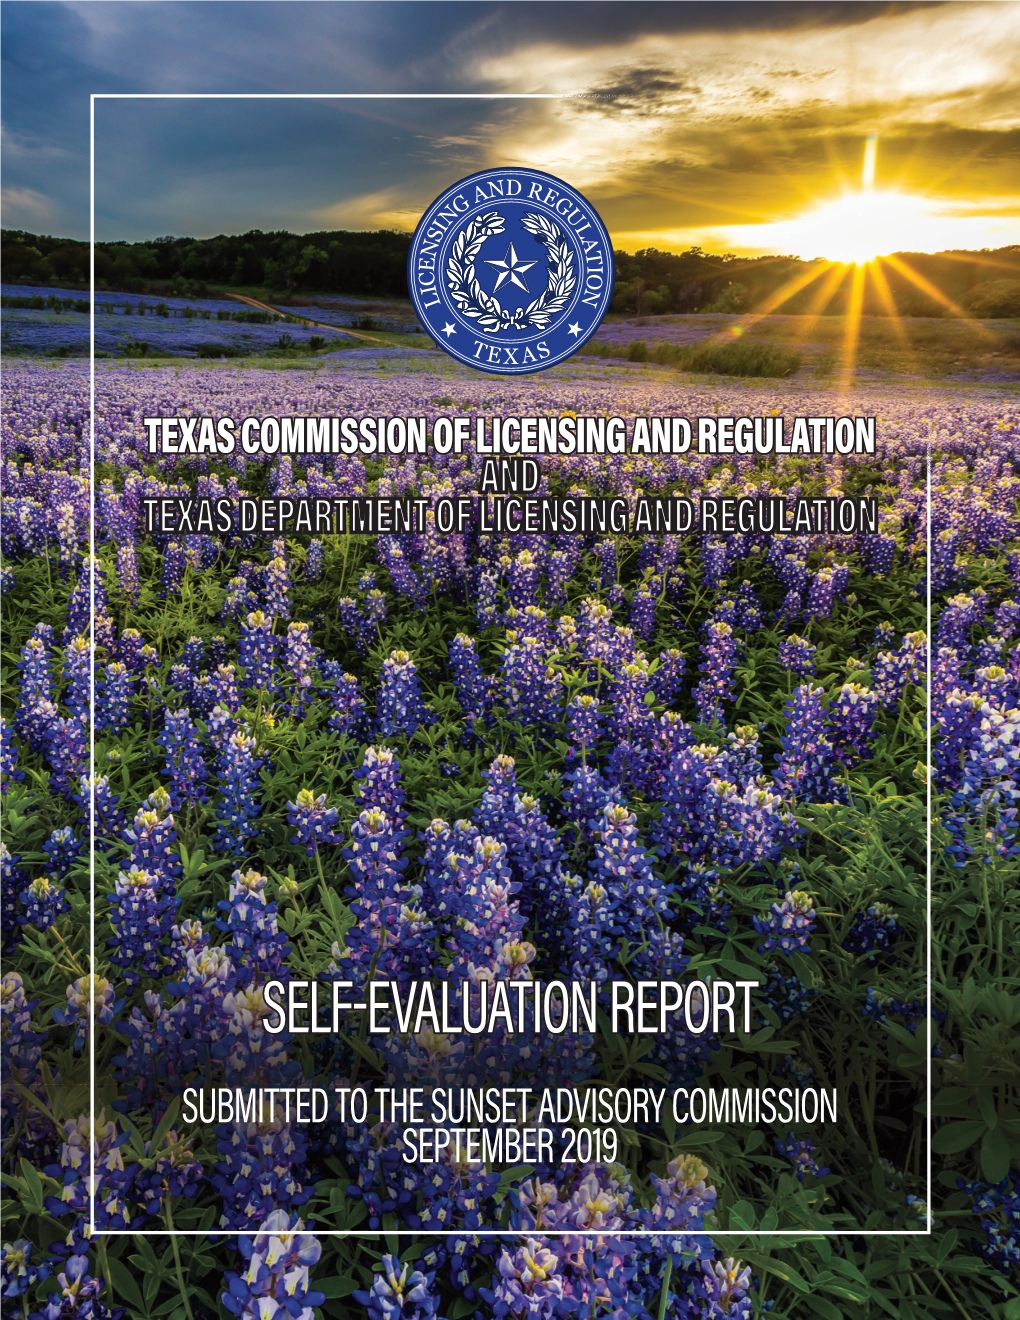 Texas Department of Licensing and Regulation Self-Evaluation Report